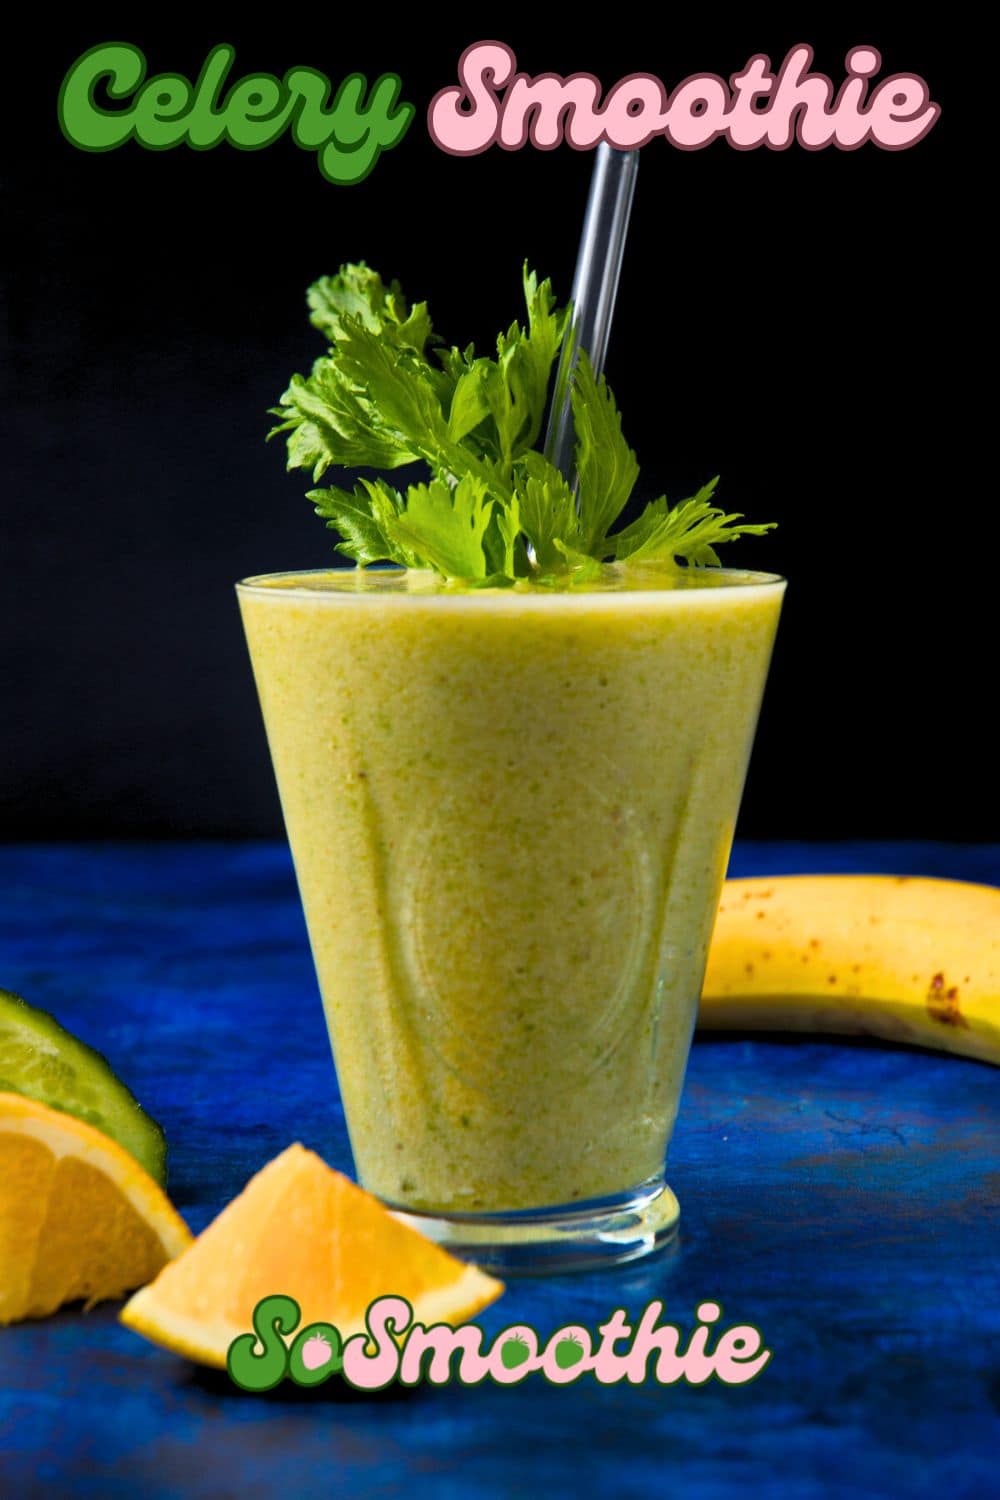 Celery smoothie in glass.